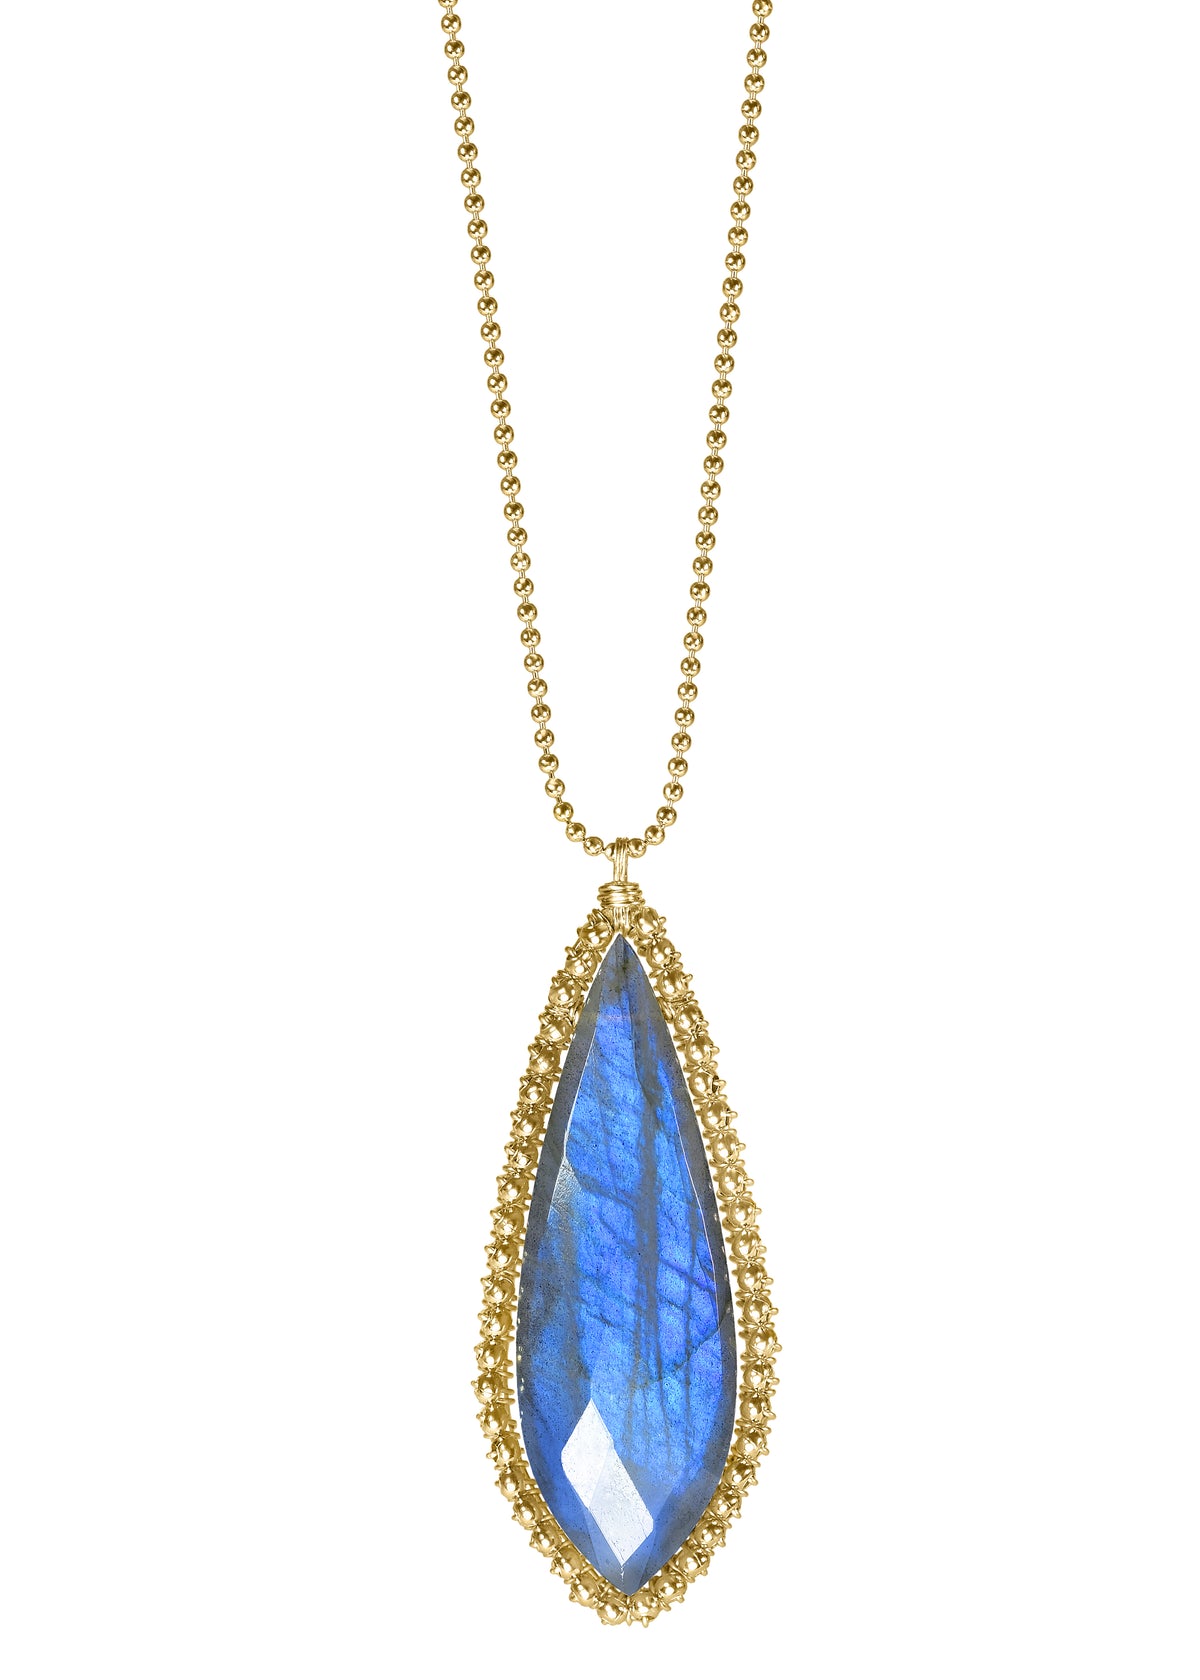 Labradorite 14k gold fill Necklace measures 30&quot; in length Pendant measures 1-1/4&quot; in length and 1/2&quot; in width at the widest point Handmade in our Los Angeles studio